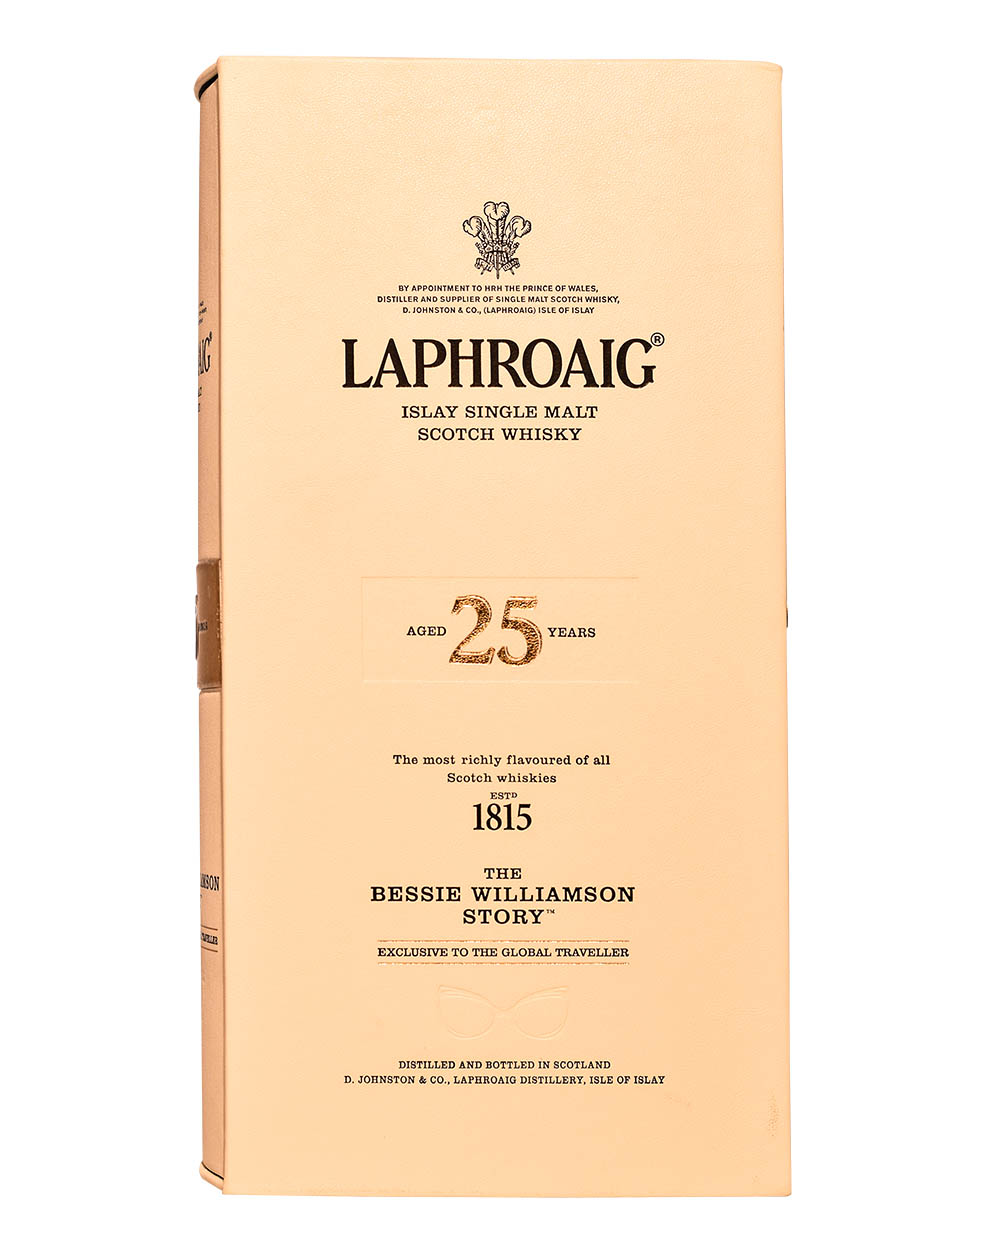 Laphroaig The Bessie Williamson Story (25 Years Old) Book 2 Musthave Malts MHM